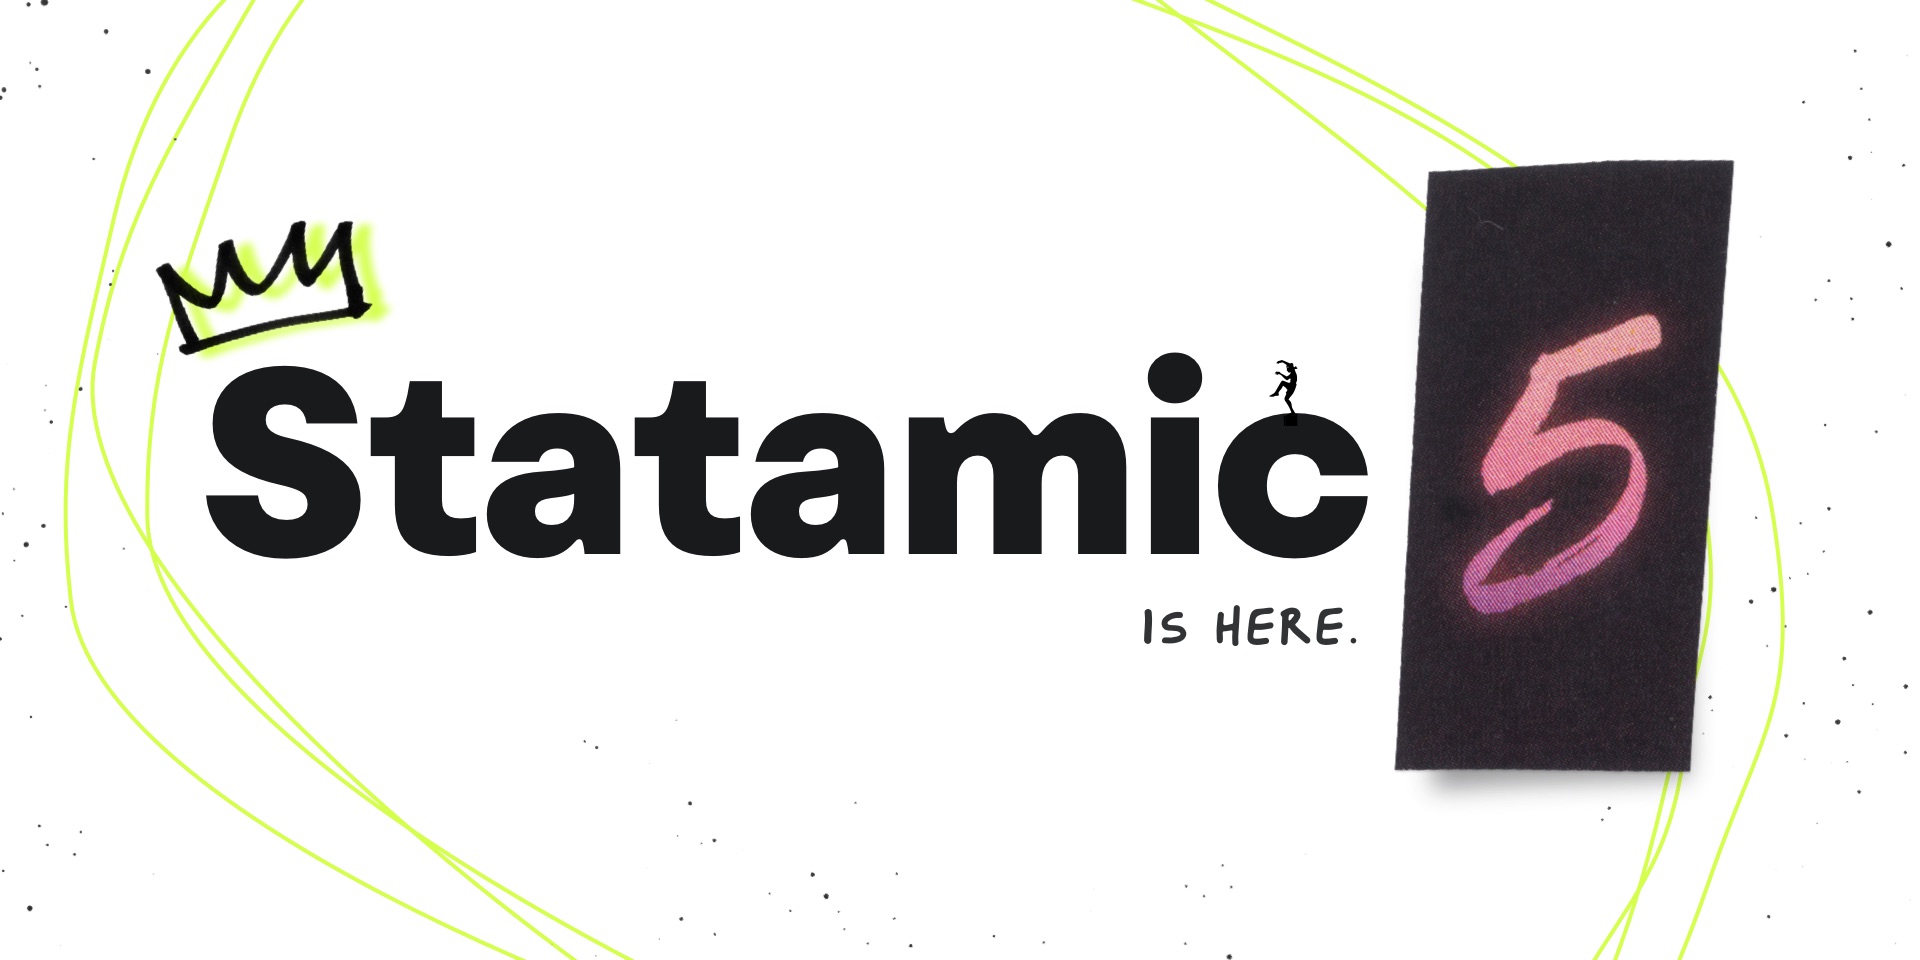 The next major version of Statamic has arrived.